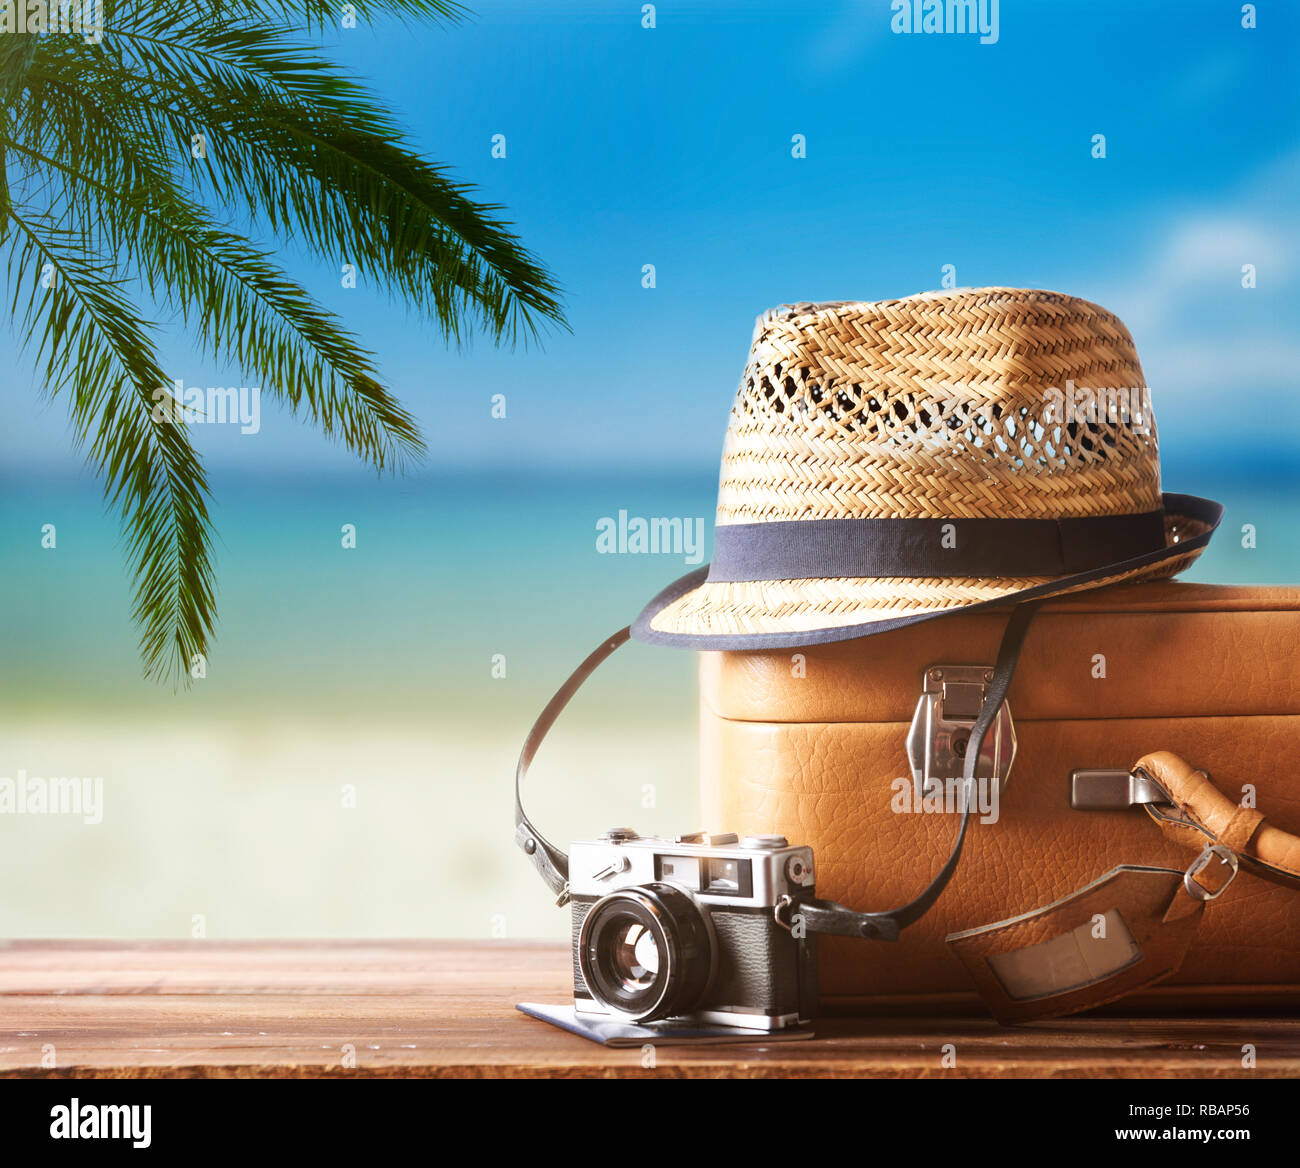 Vintage suitcase, hipster hat, photo camera and passport on wooden dack. Tropical sea, beach and palm three in background. Summer holiday traveling de Stock Photo